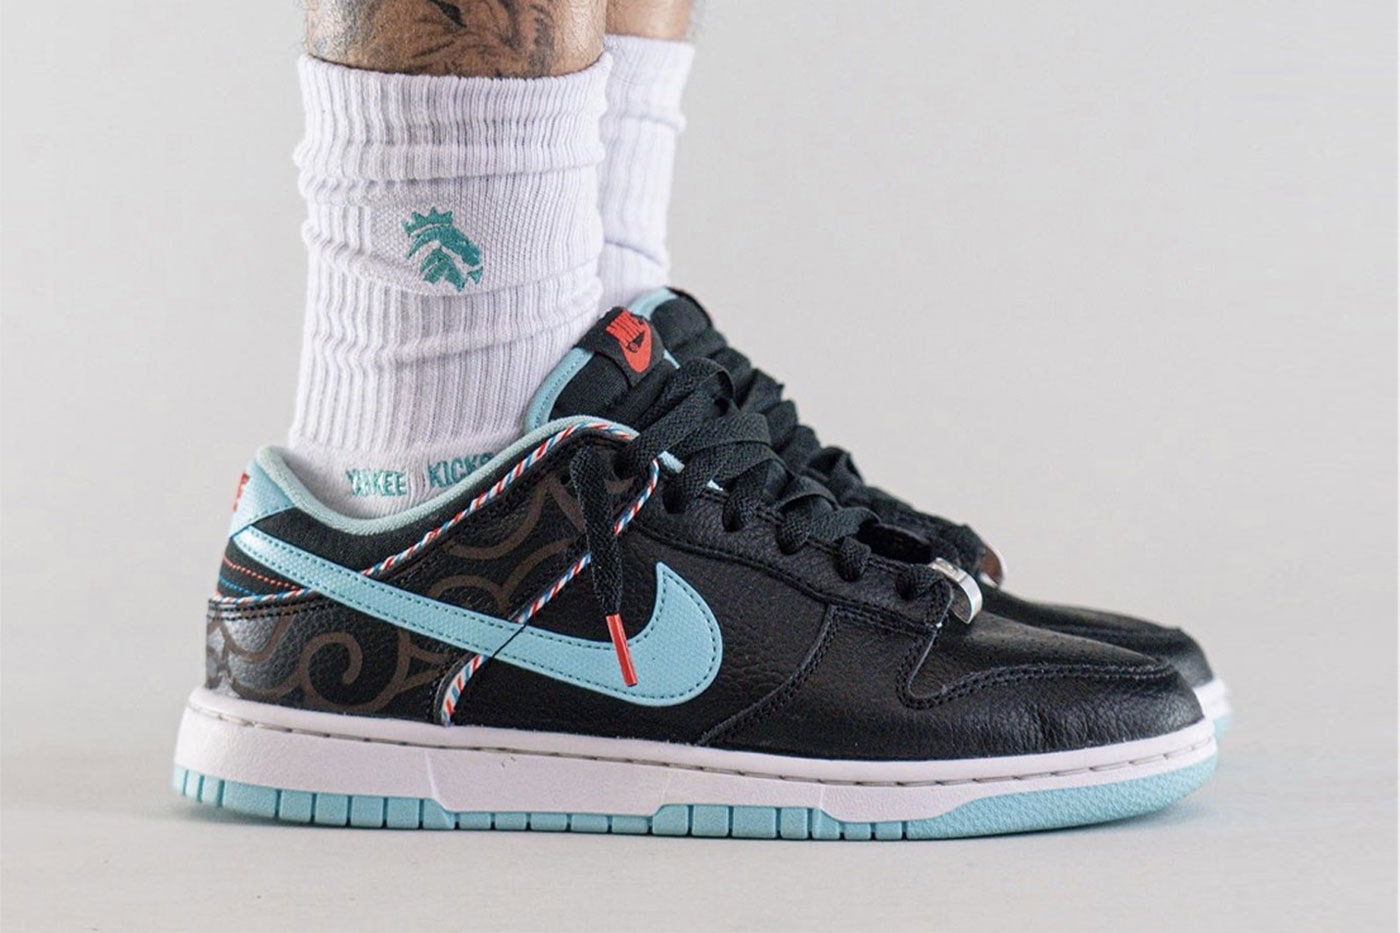 Nike Dunk Low Barber Shop On-Foot Look Release Info DH7614-001 Date Buy Price 